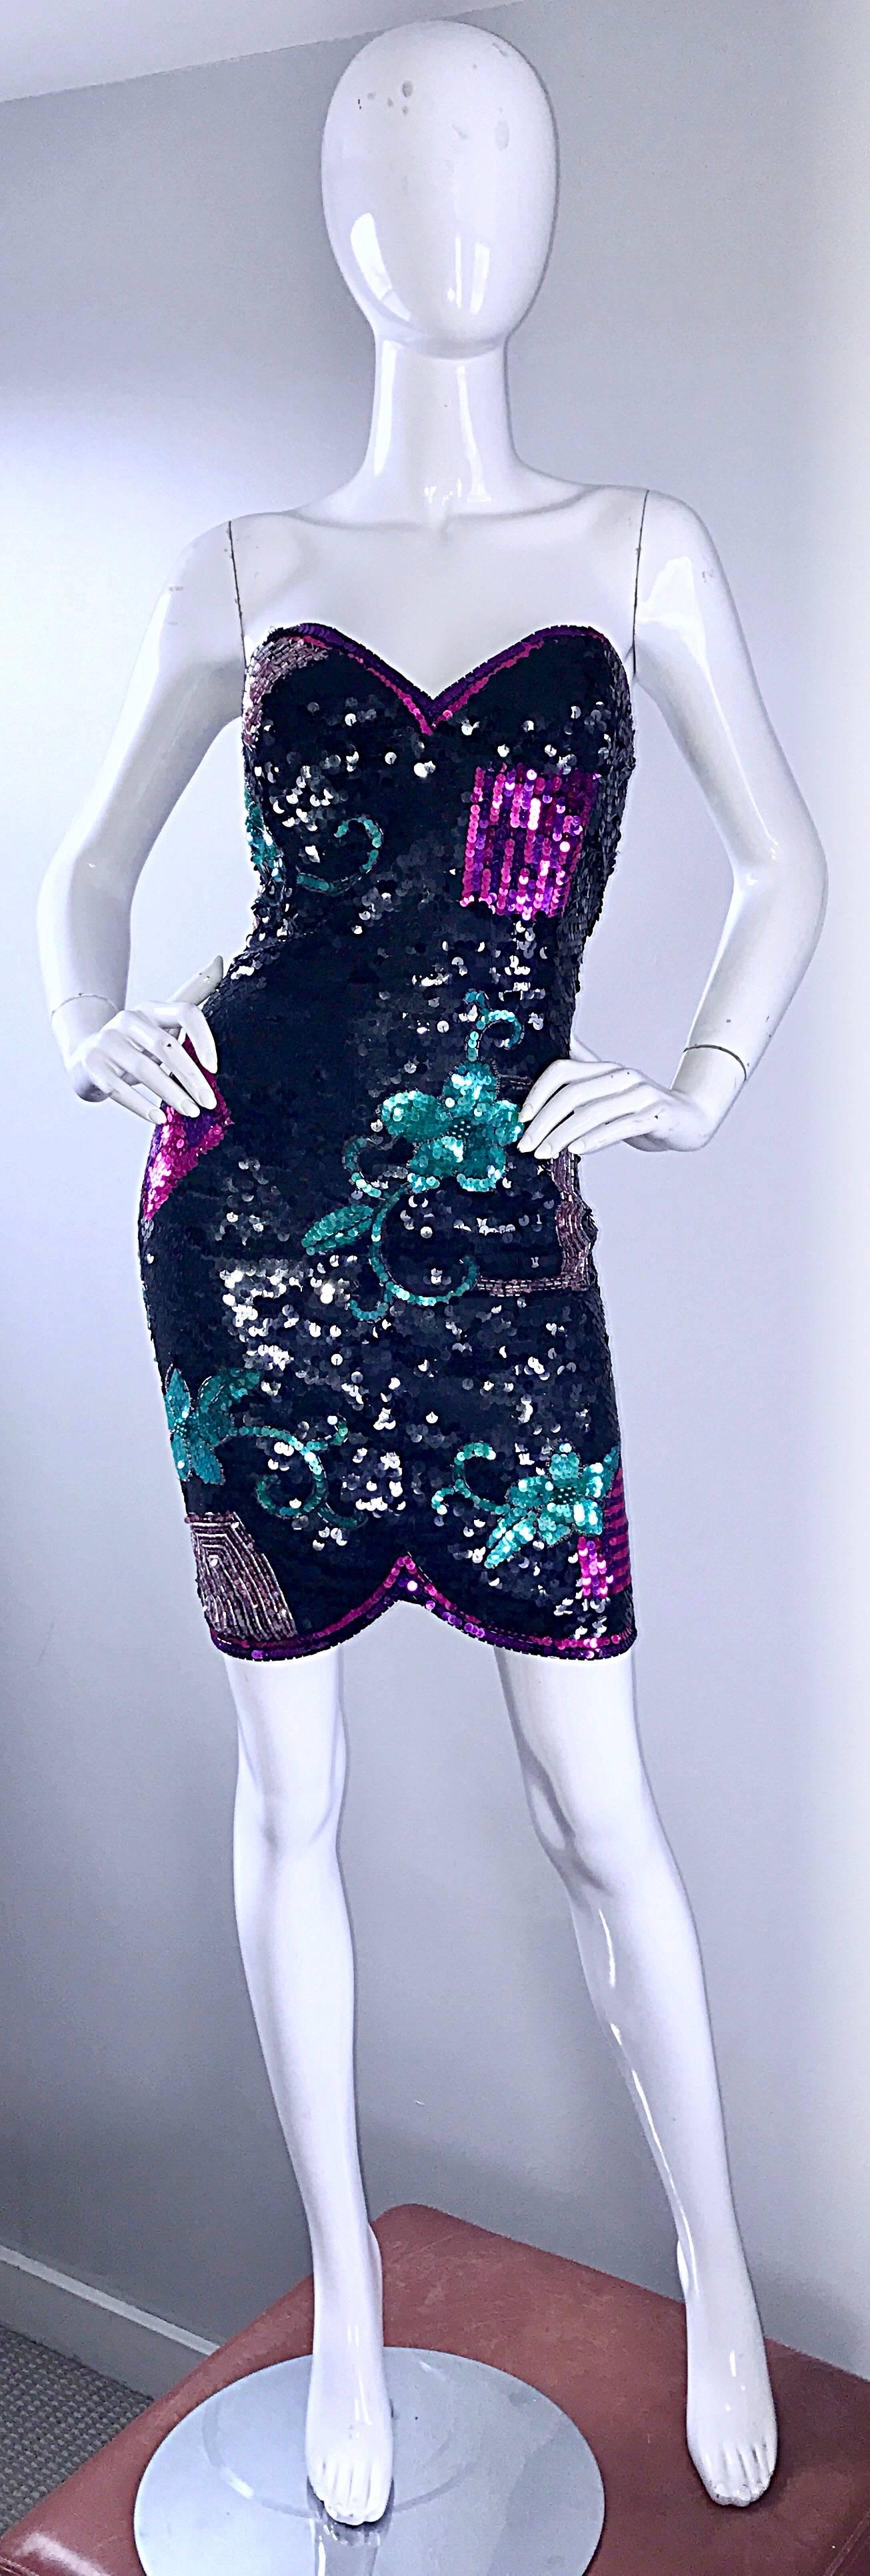 Sexy larger size strapless sequin dress! Features thousands of hand-sewn sequins and beads throughout. Asymmetrical hem dips slightly shorter on the center front. Black sequins, with pink, green and purple sequined designs thorughout. Very